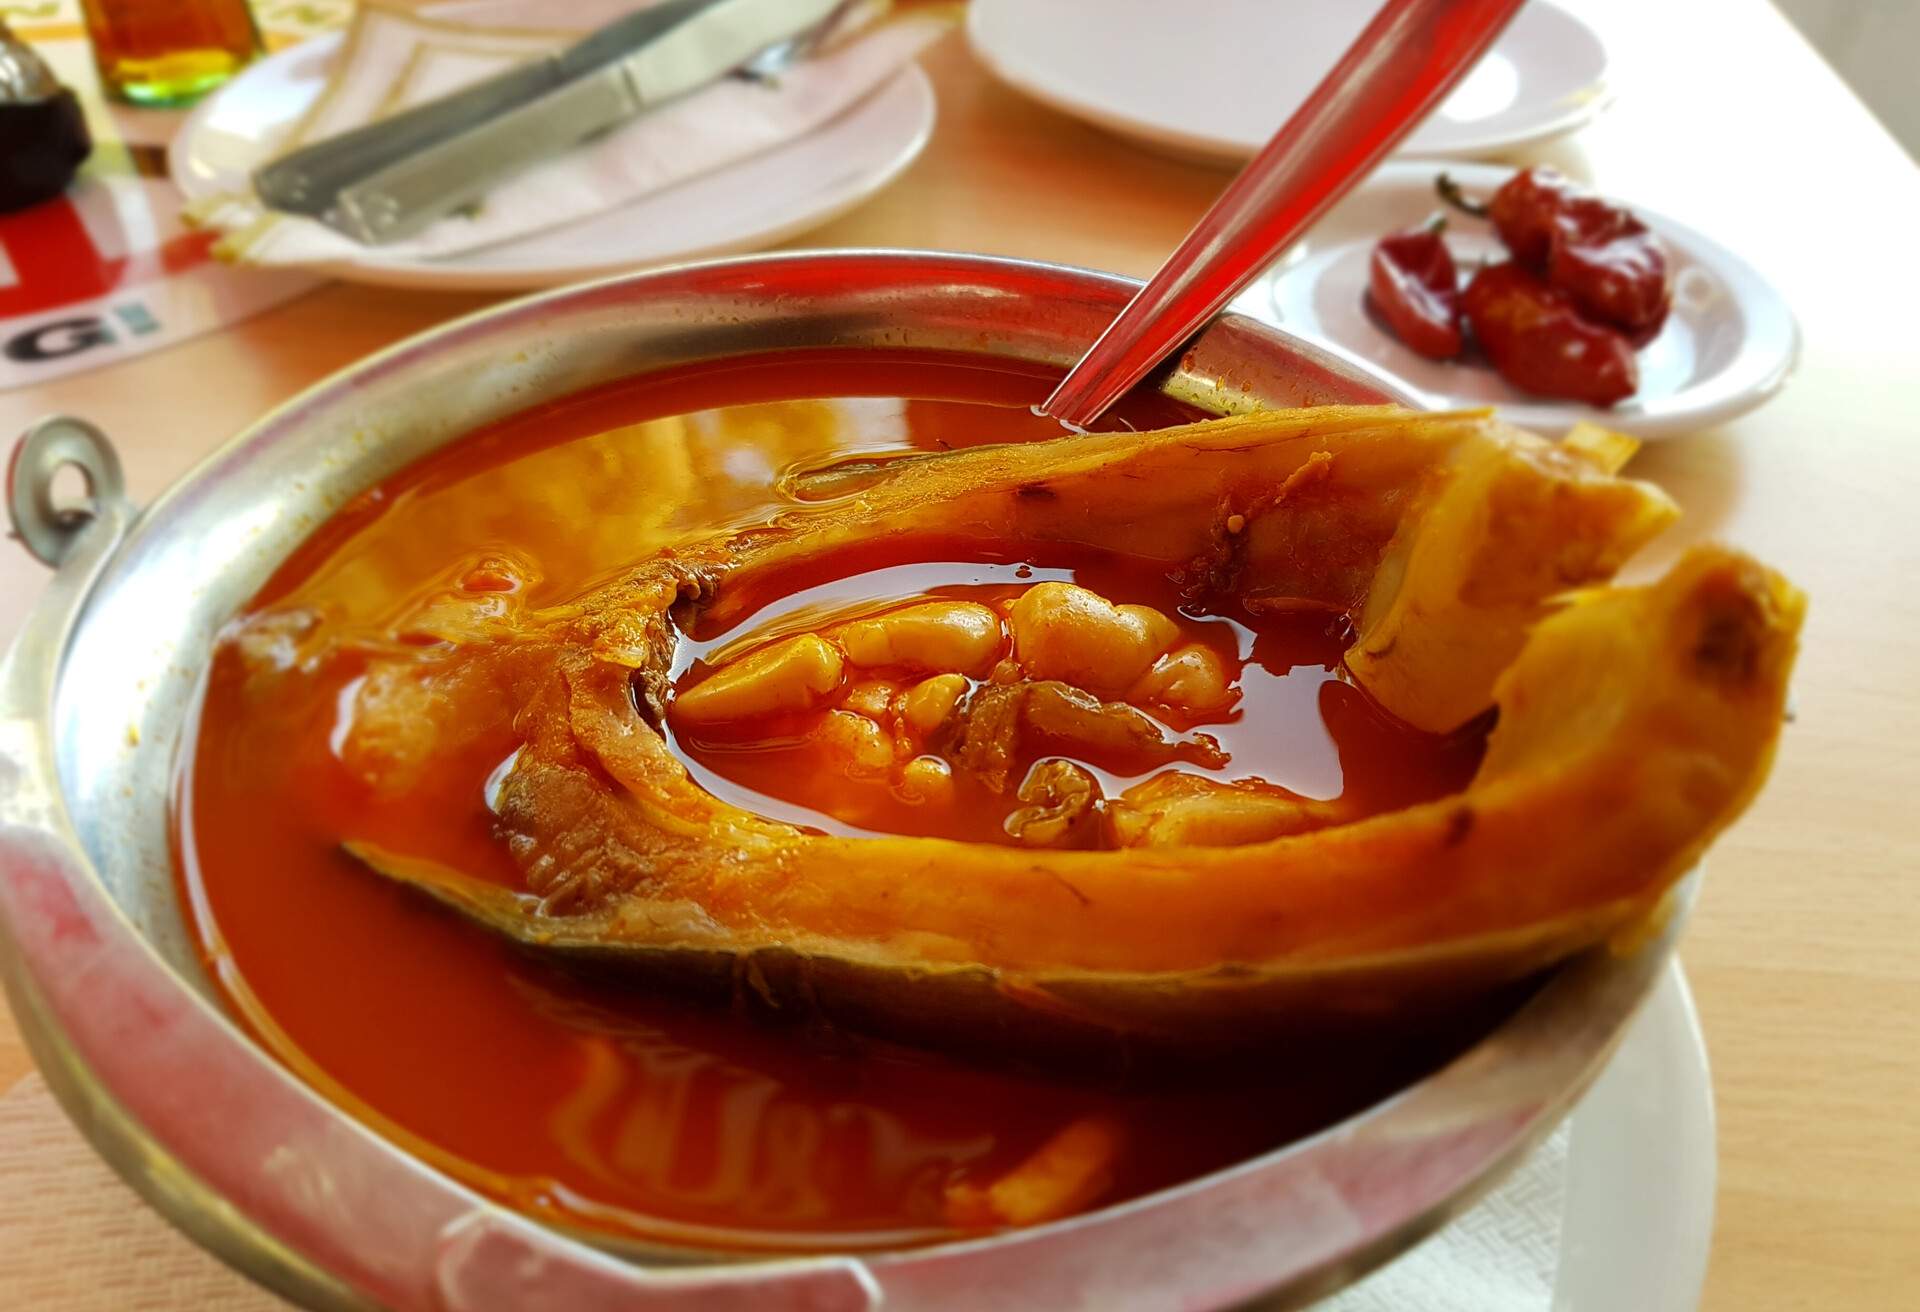 A red fish soup topped with fish fillet served in a metal soup bowl.